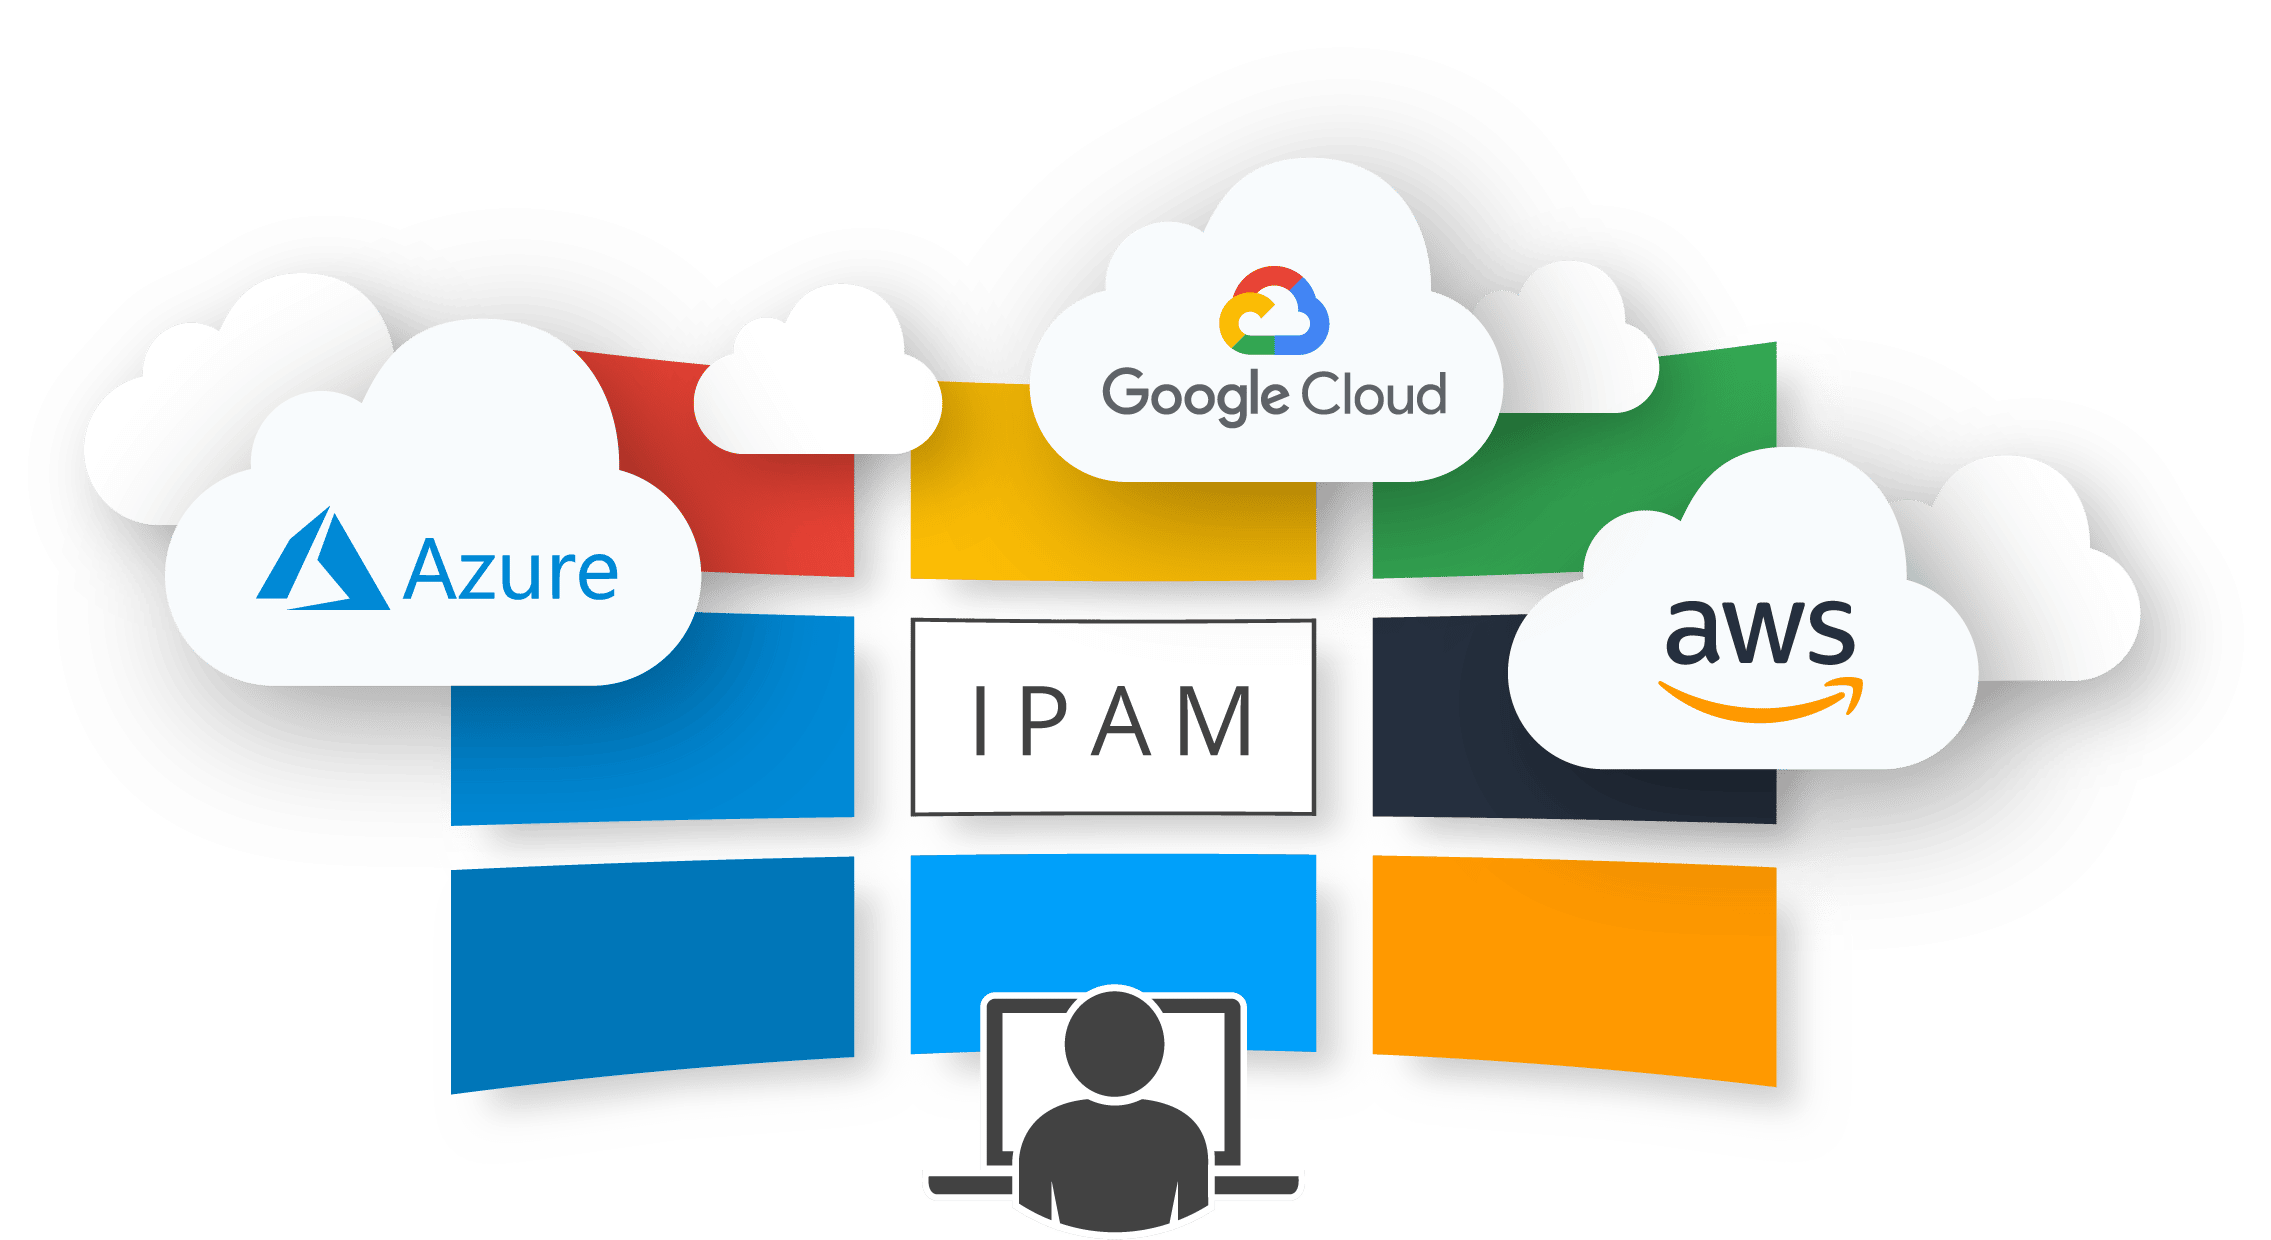 IPAM-Unified-Management-Azure-AWS-CGP-cloud-visibility